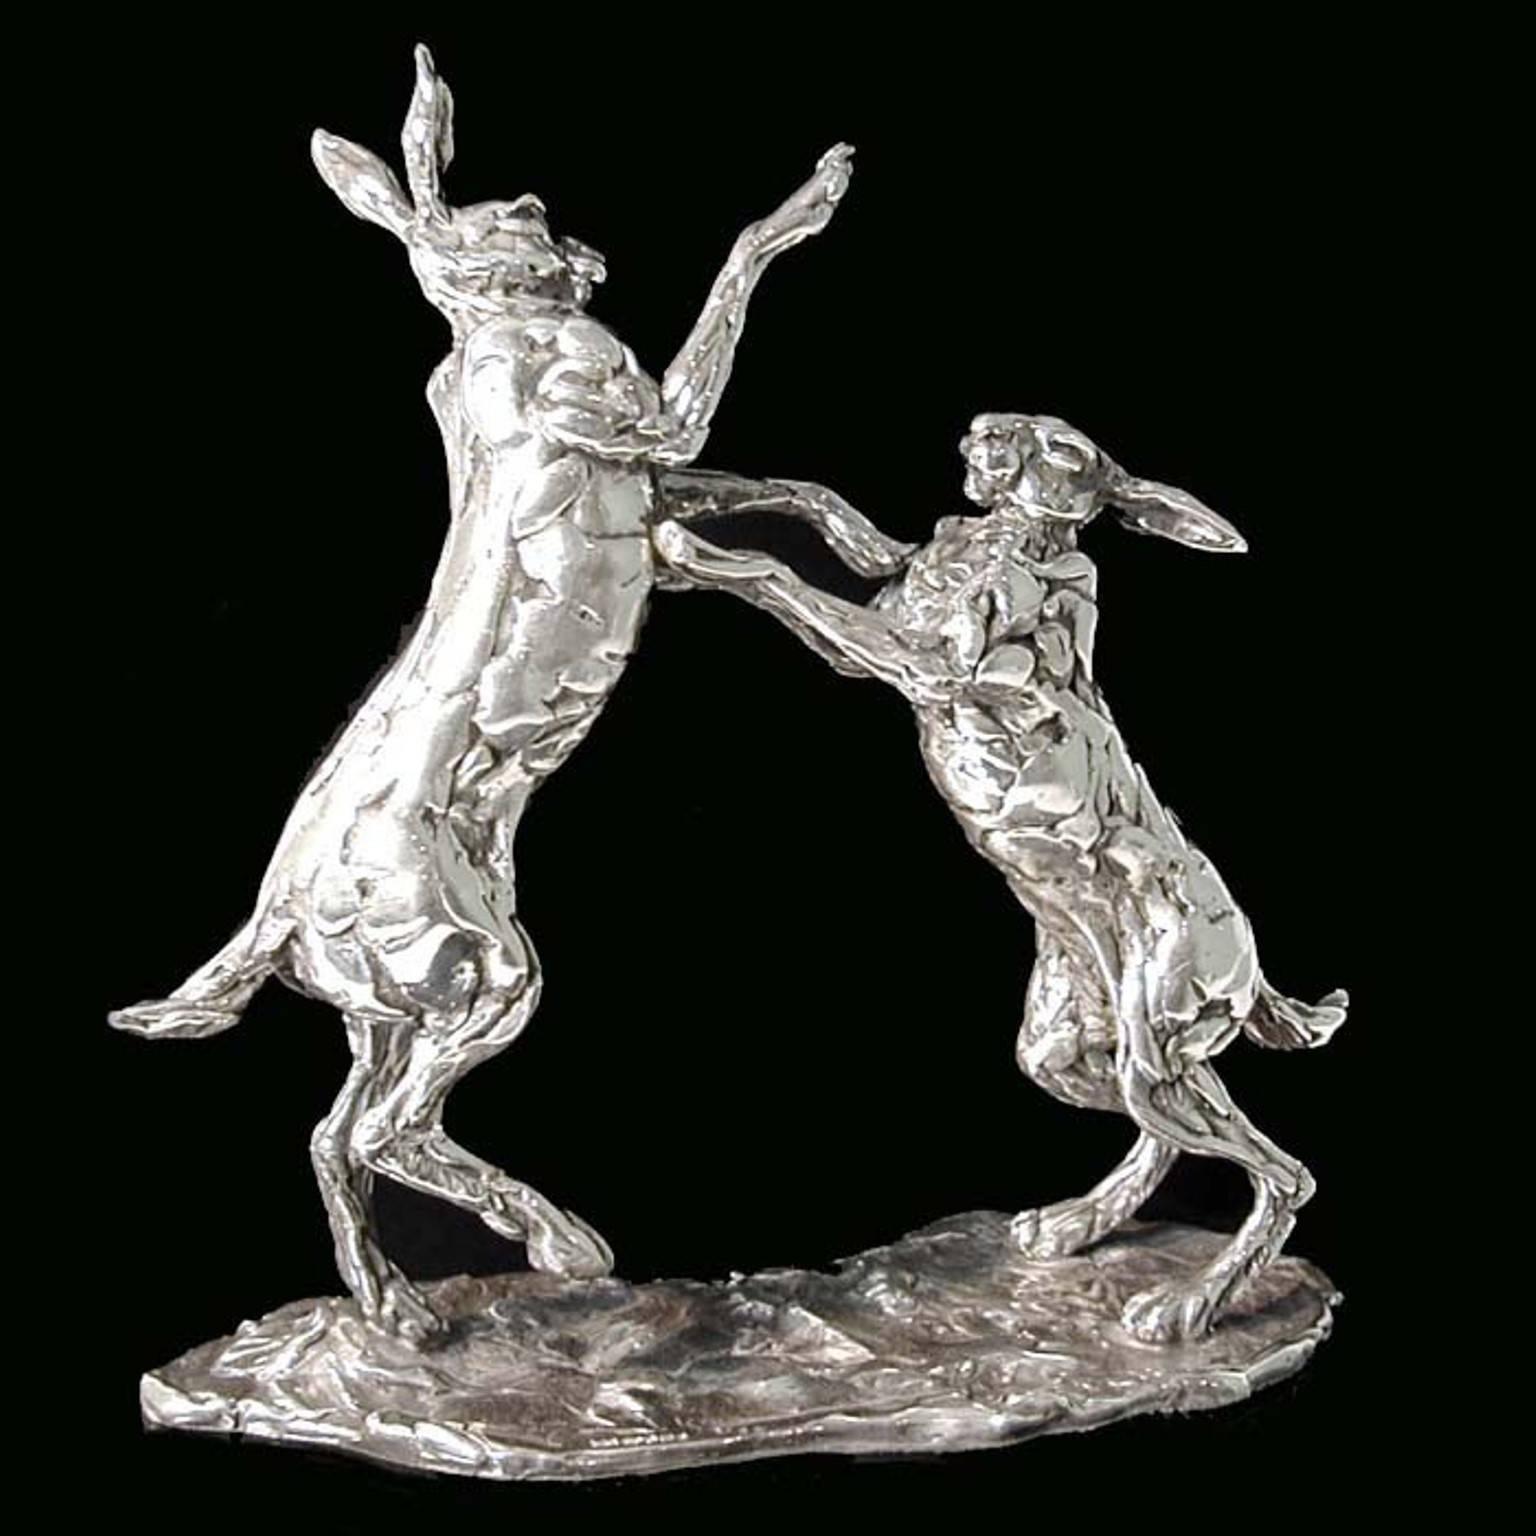 Height 20.5cm x length 20cm
1187 grams

A 'Boxing Hares' sterling silver sculpture by Lucy Kinsella, the limited edition pair of long eared brown hares caught mid boxing match, with one stood tall on stretched hind legs raining blows down on the